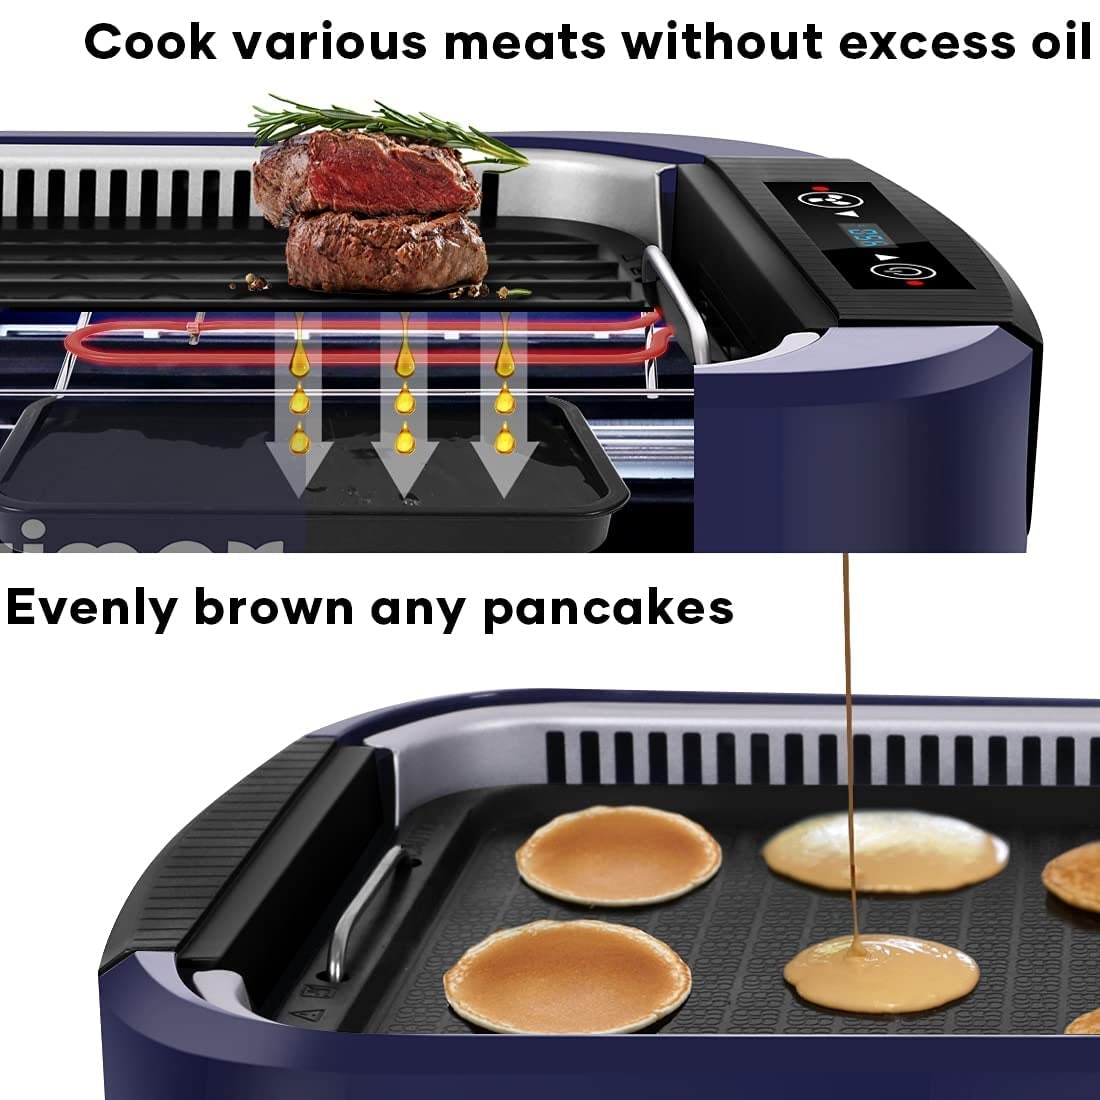 https://ak1.ostkcdn.com/images/products/is/images/direct/2e96c707f6d3a612c3571d96d8bb3fbdc58ed526/Indoor-Grill-Electric-Grill-Griddle-Smokeless-Grill%2C-Portable-Korean-BBQ-Grill-with-Turbo-Smoke-Extractor-Technology.jpg